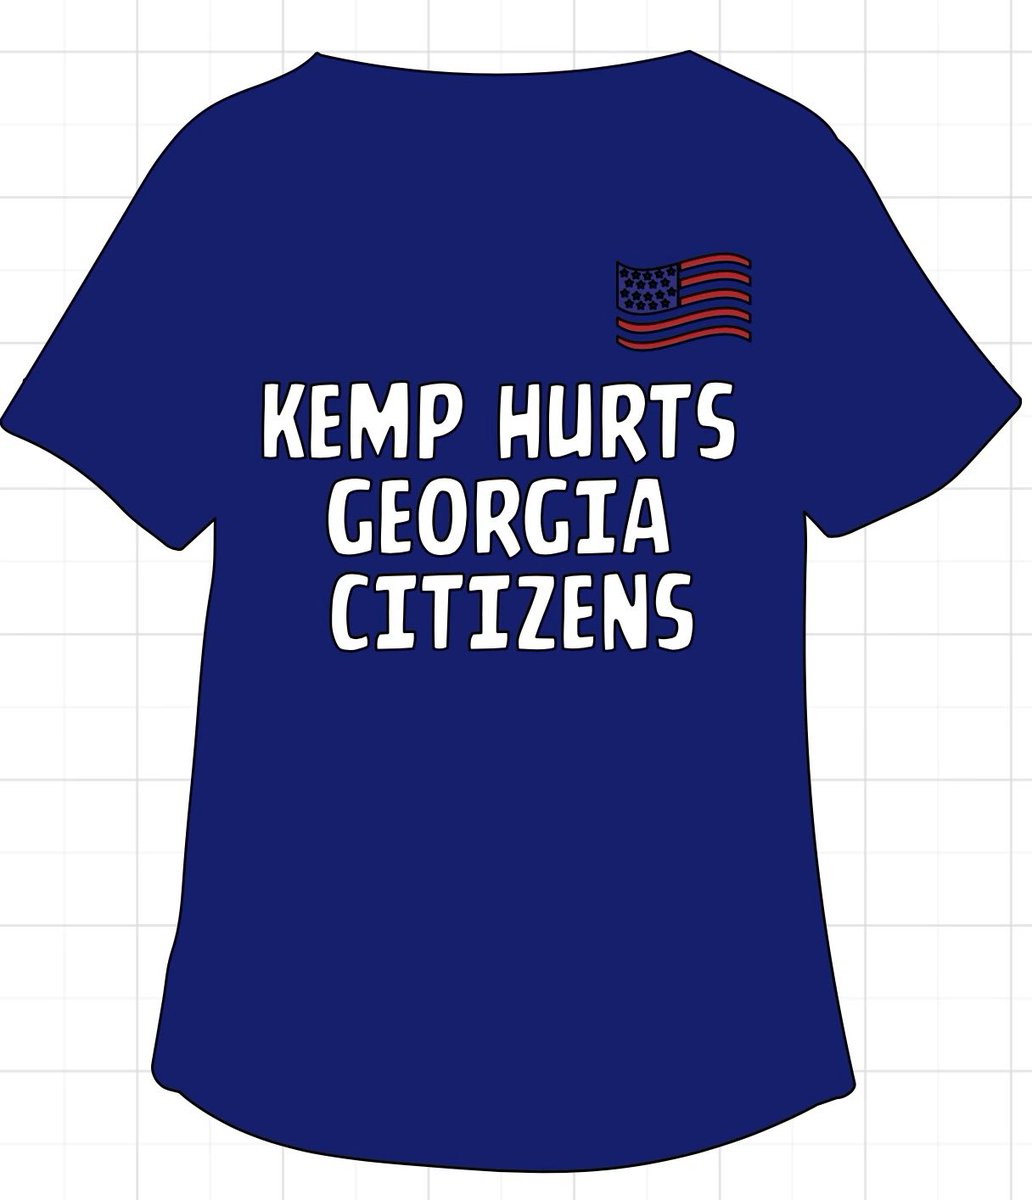 It is easy to understand how Georgians would have NO respect for Kemp’s Opinions. Do the opposite. Instead of listening, don’t listen and find your own way. @realDonaldTrump @BrianKempGA